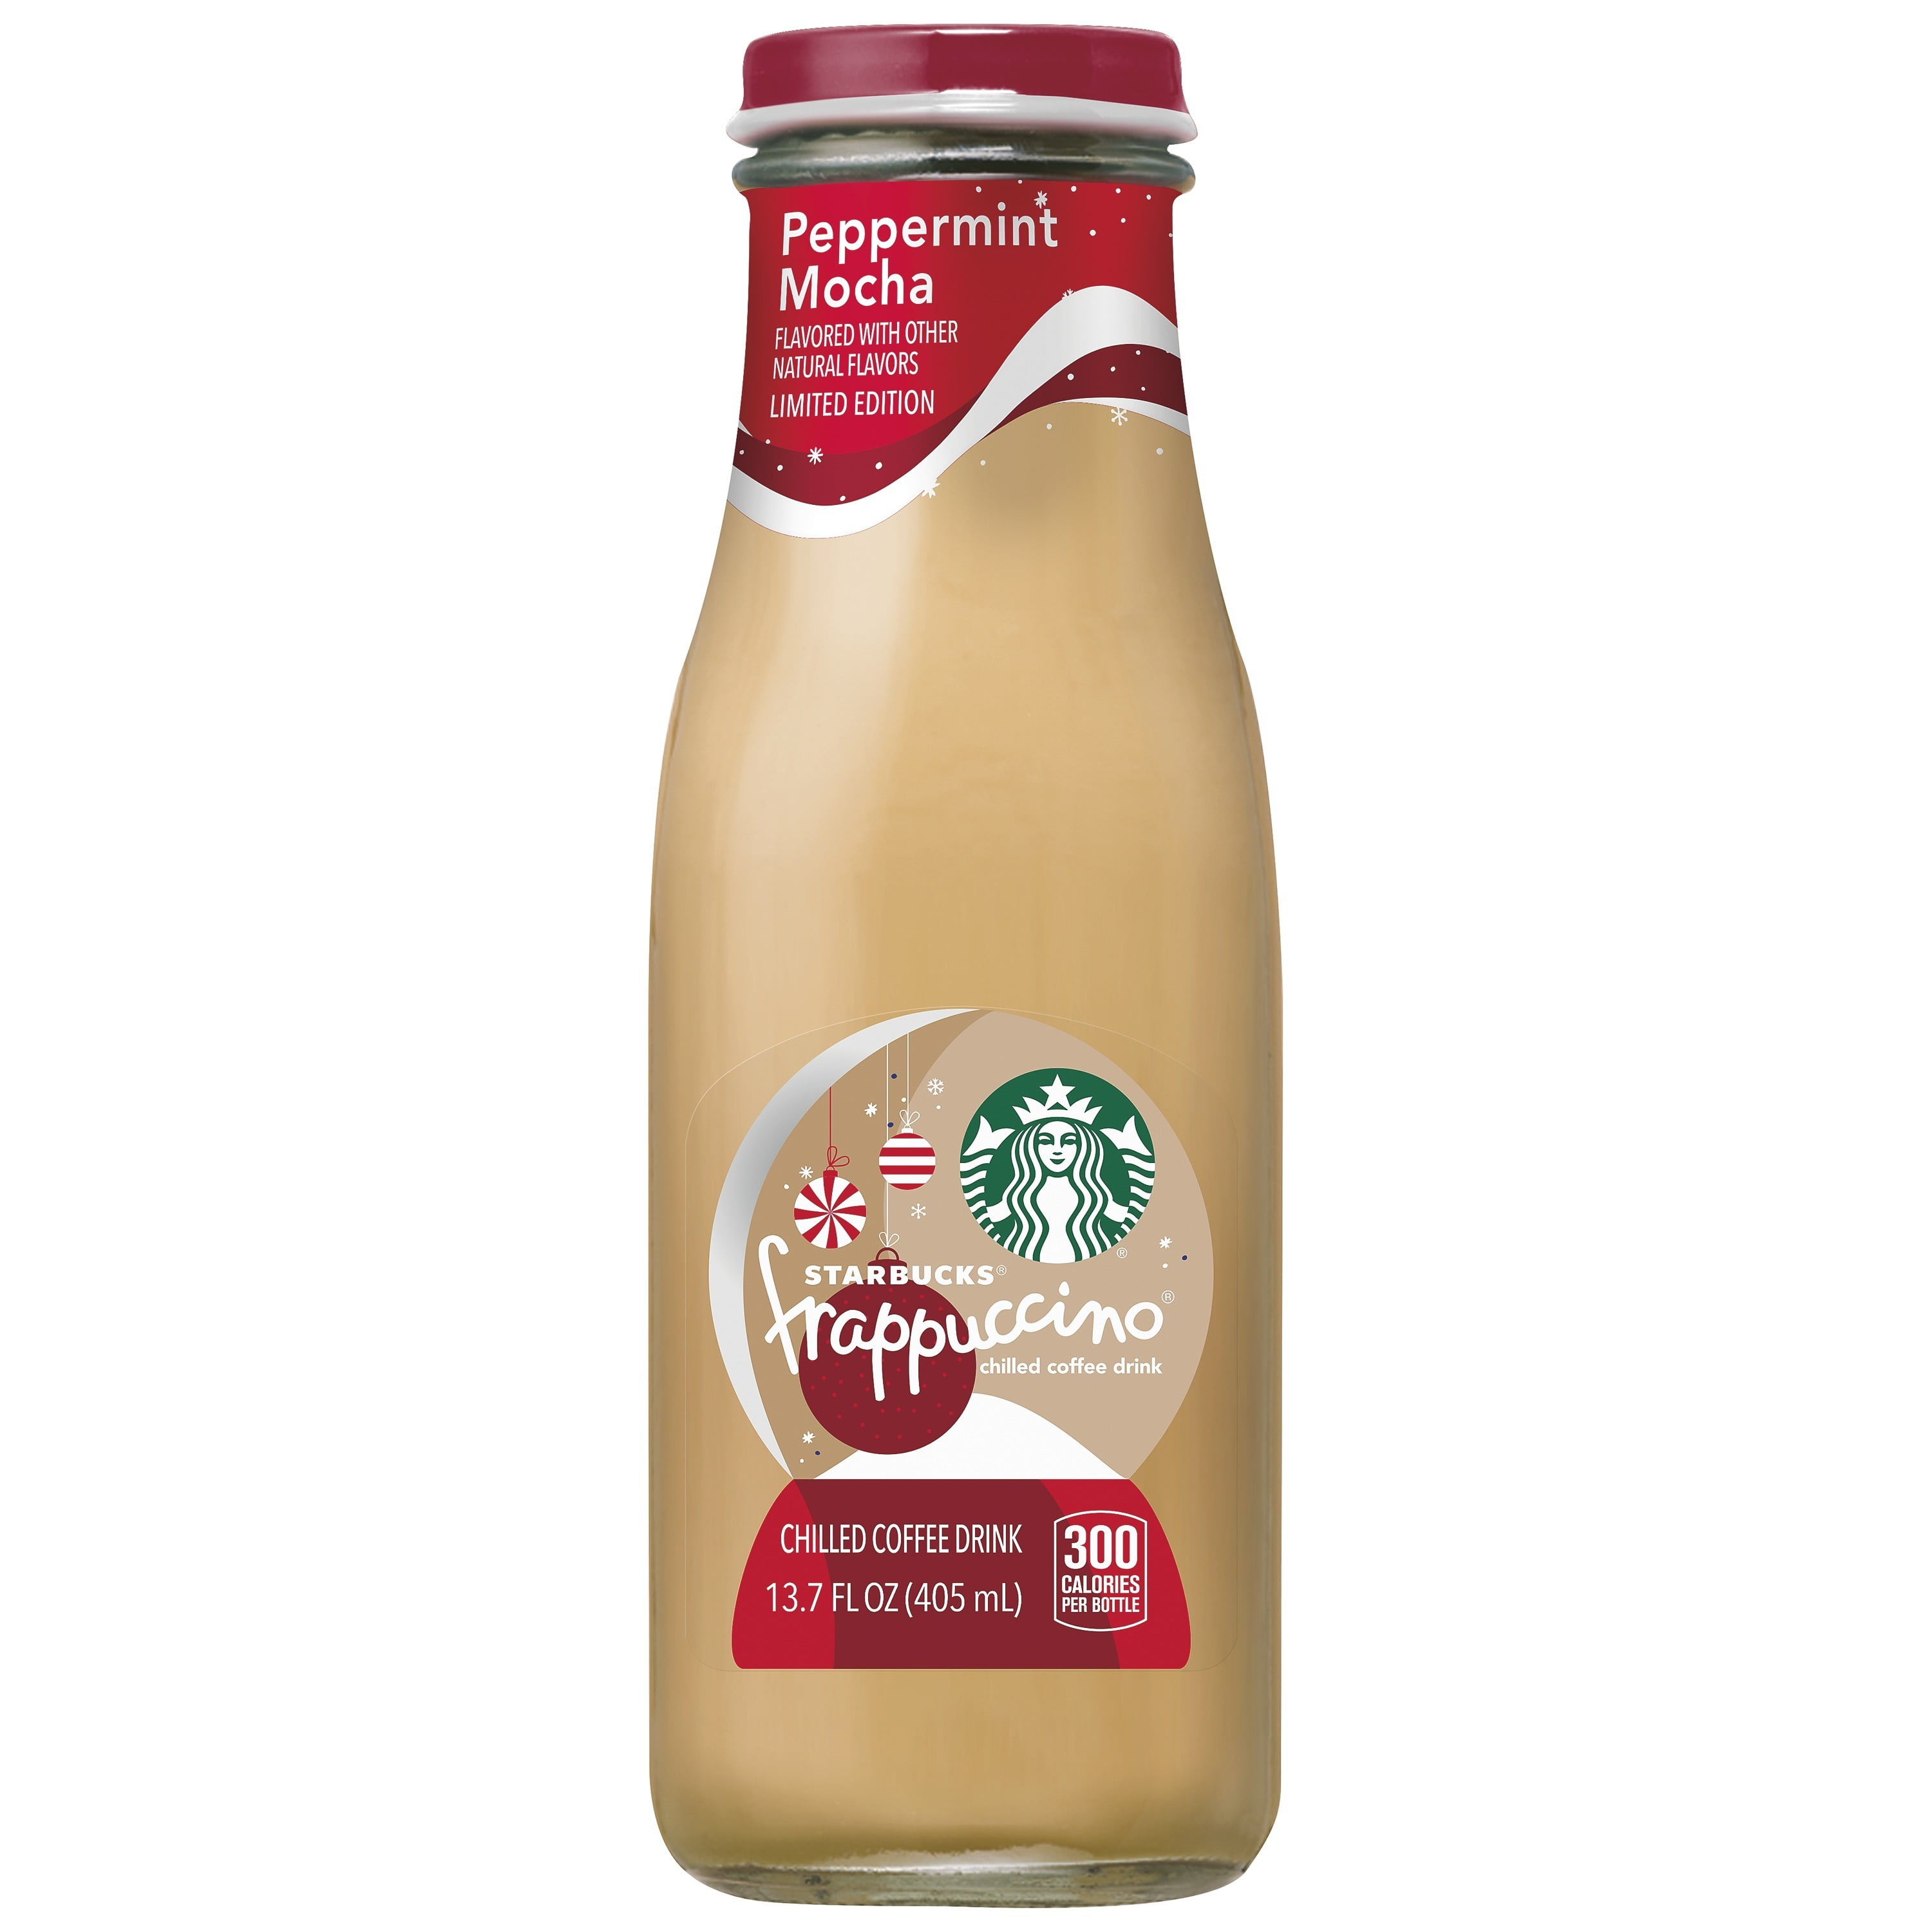 Starbucks Frappuccino Peppermint Mocha Chilled Coffee Drink Limited